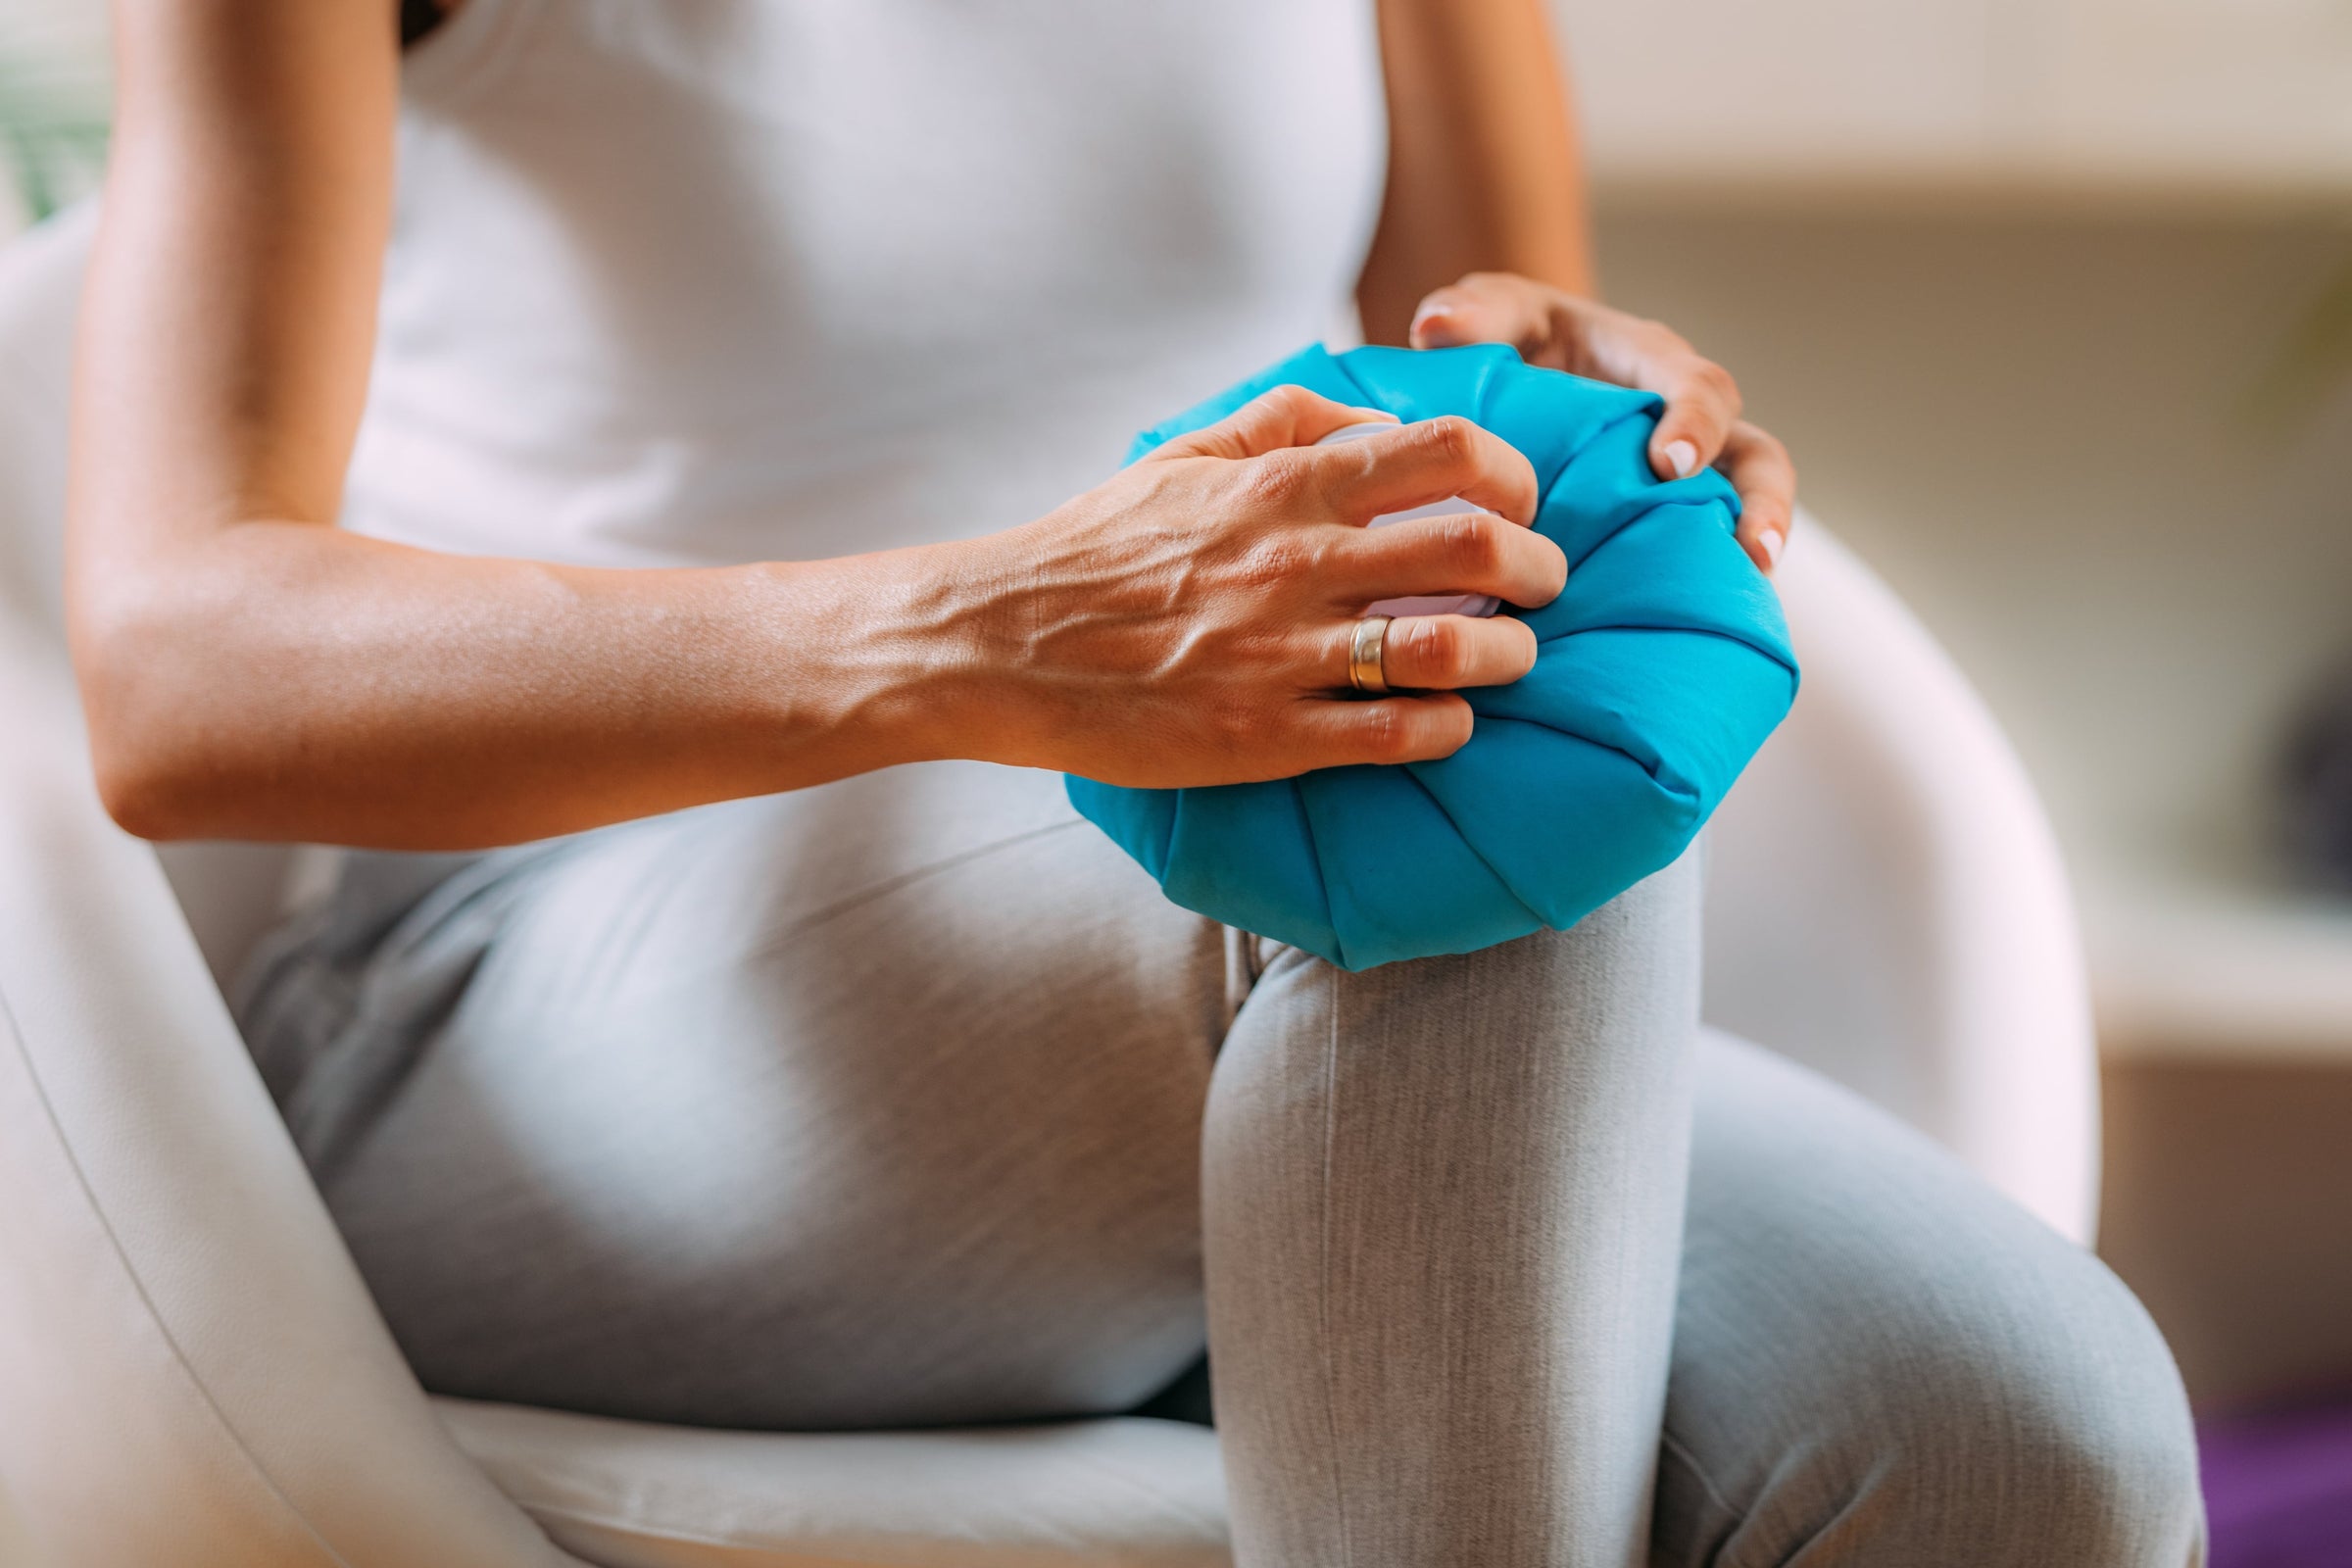 Woman holding a cold compress over her painful knee — one of the home remedies for knee pain